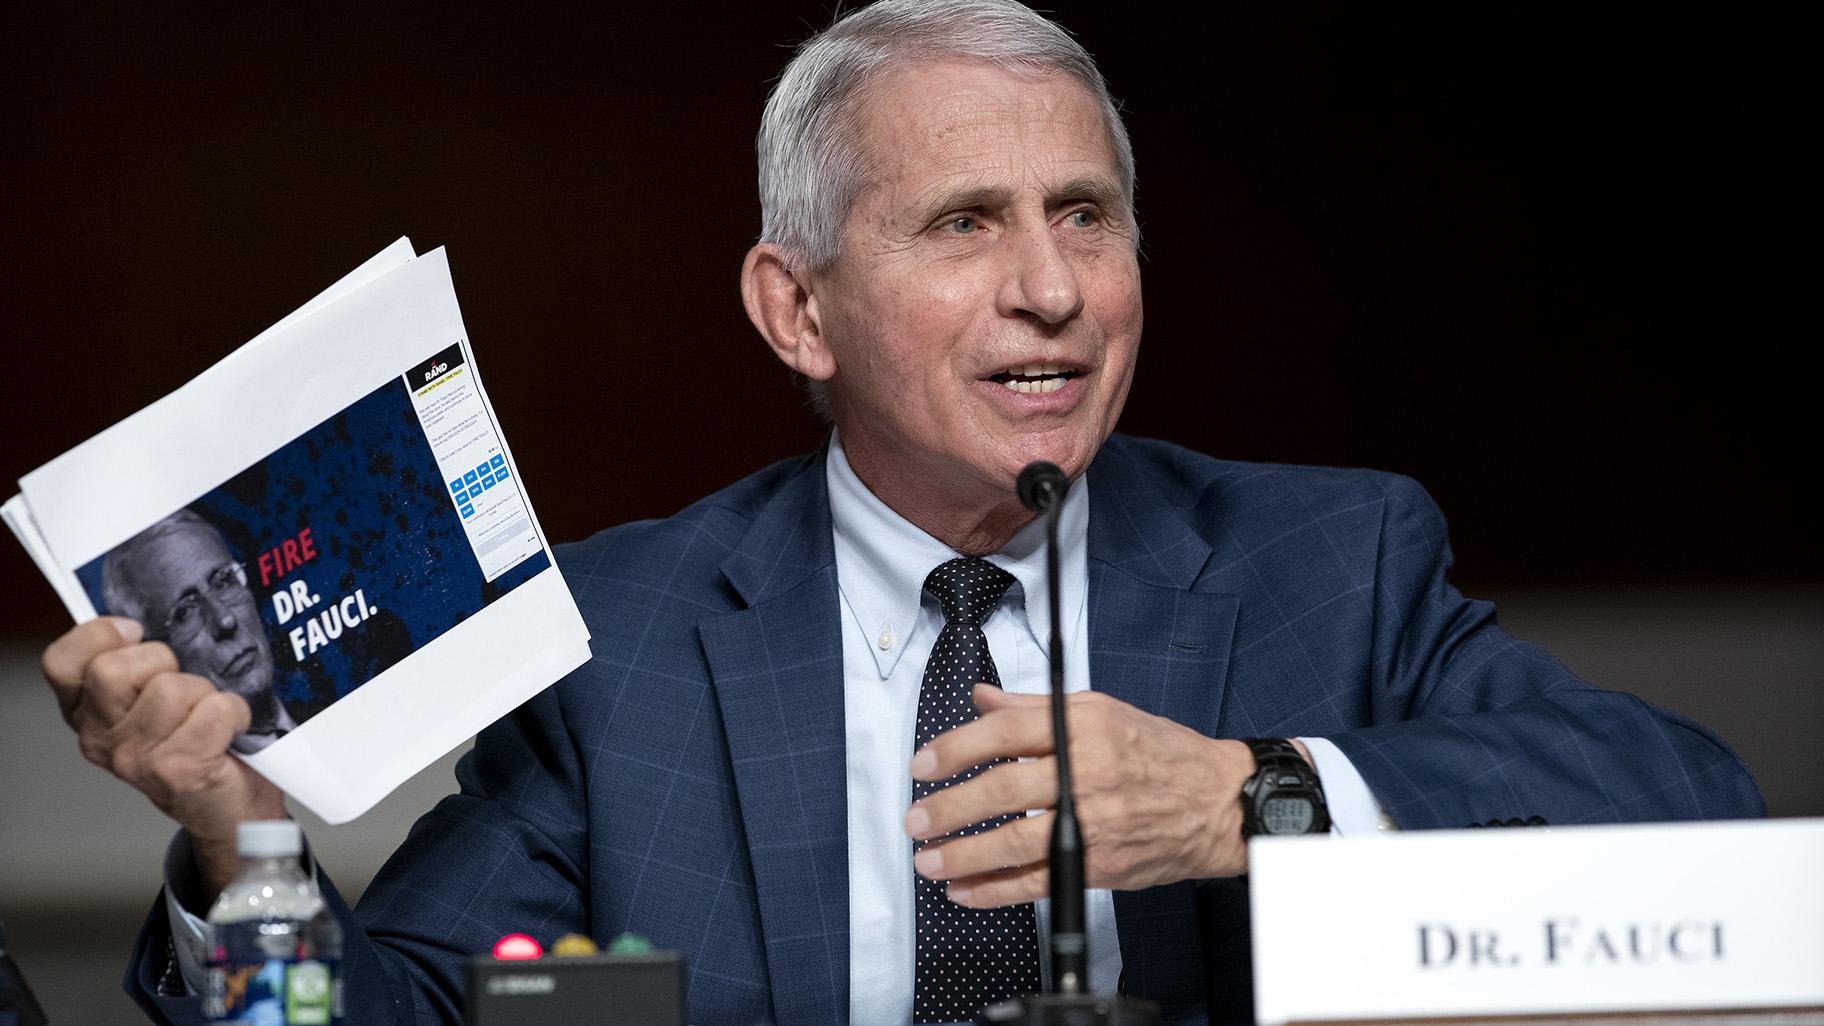 Dr. Anthony Fauci, director of the National Institute of Allergy and Infectious Diseases and chief medical adviser to the president, speaks during a Senate Health, Education, Labor, and Pensions Committee hearing Tuesday, Jan. 11, 2022 on Capitol Hill in Washington. (Greg Nash / Pool via AP)